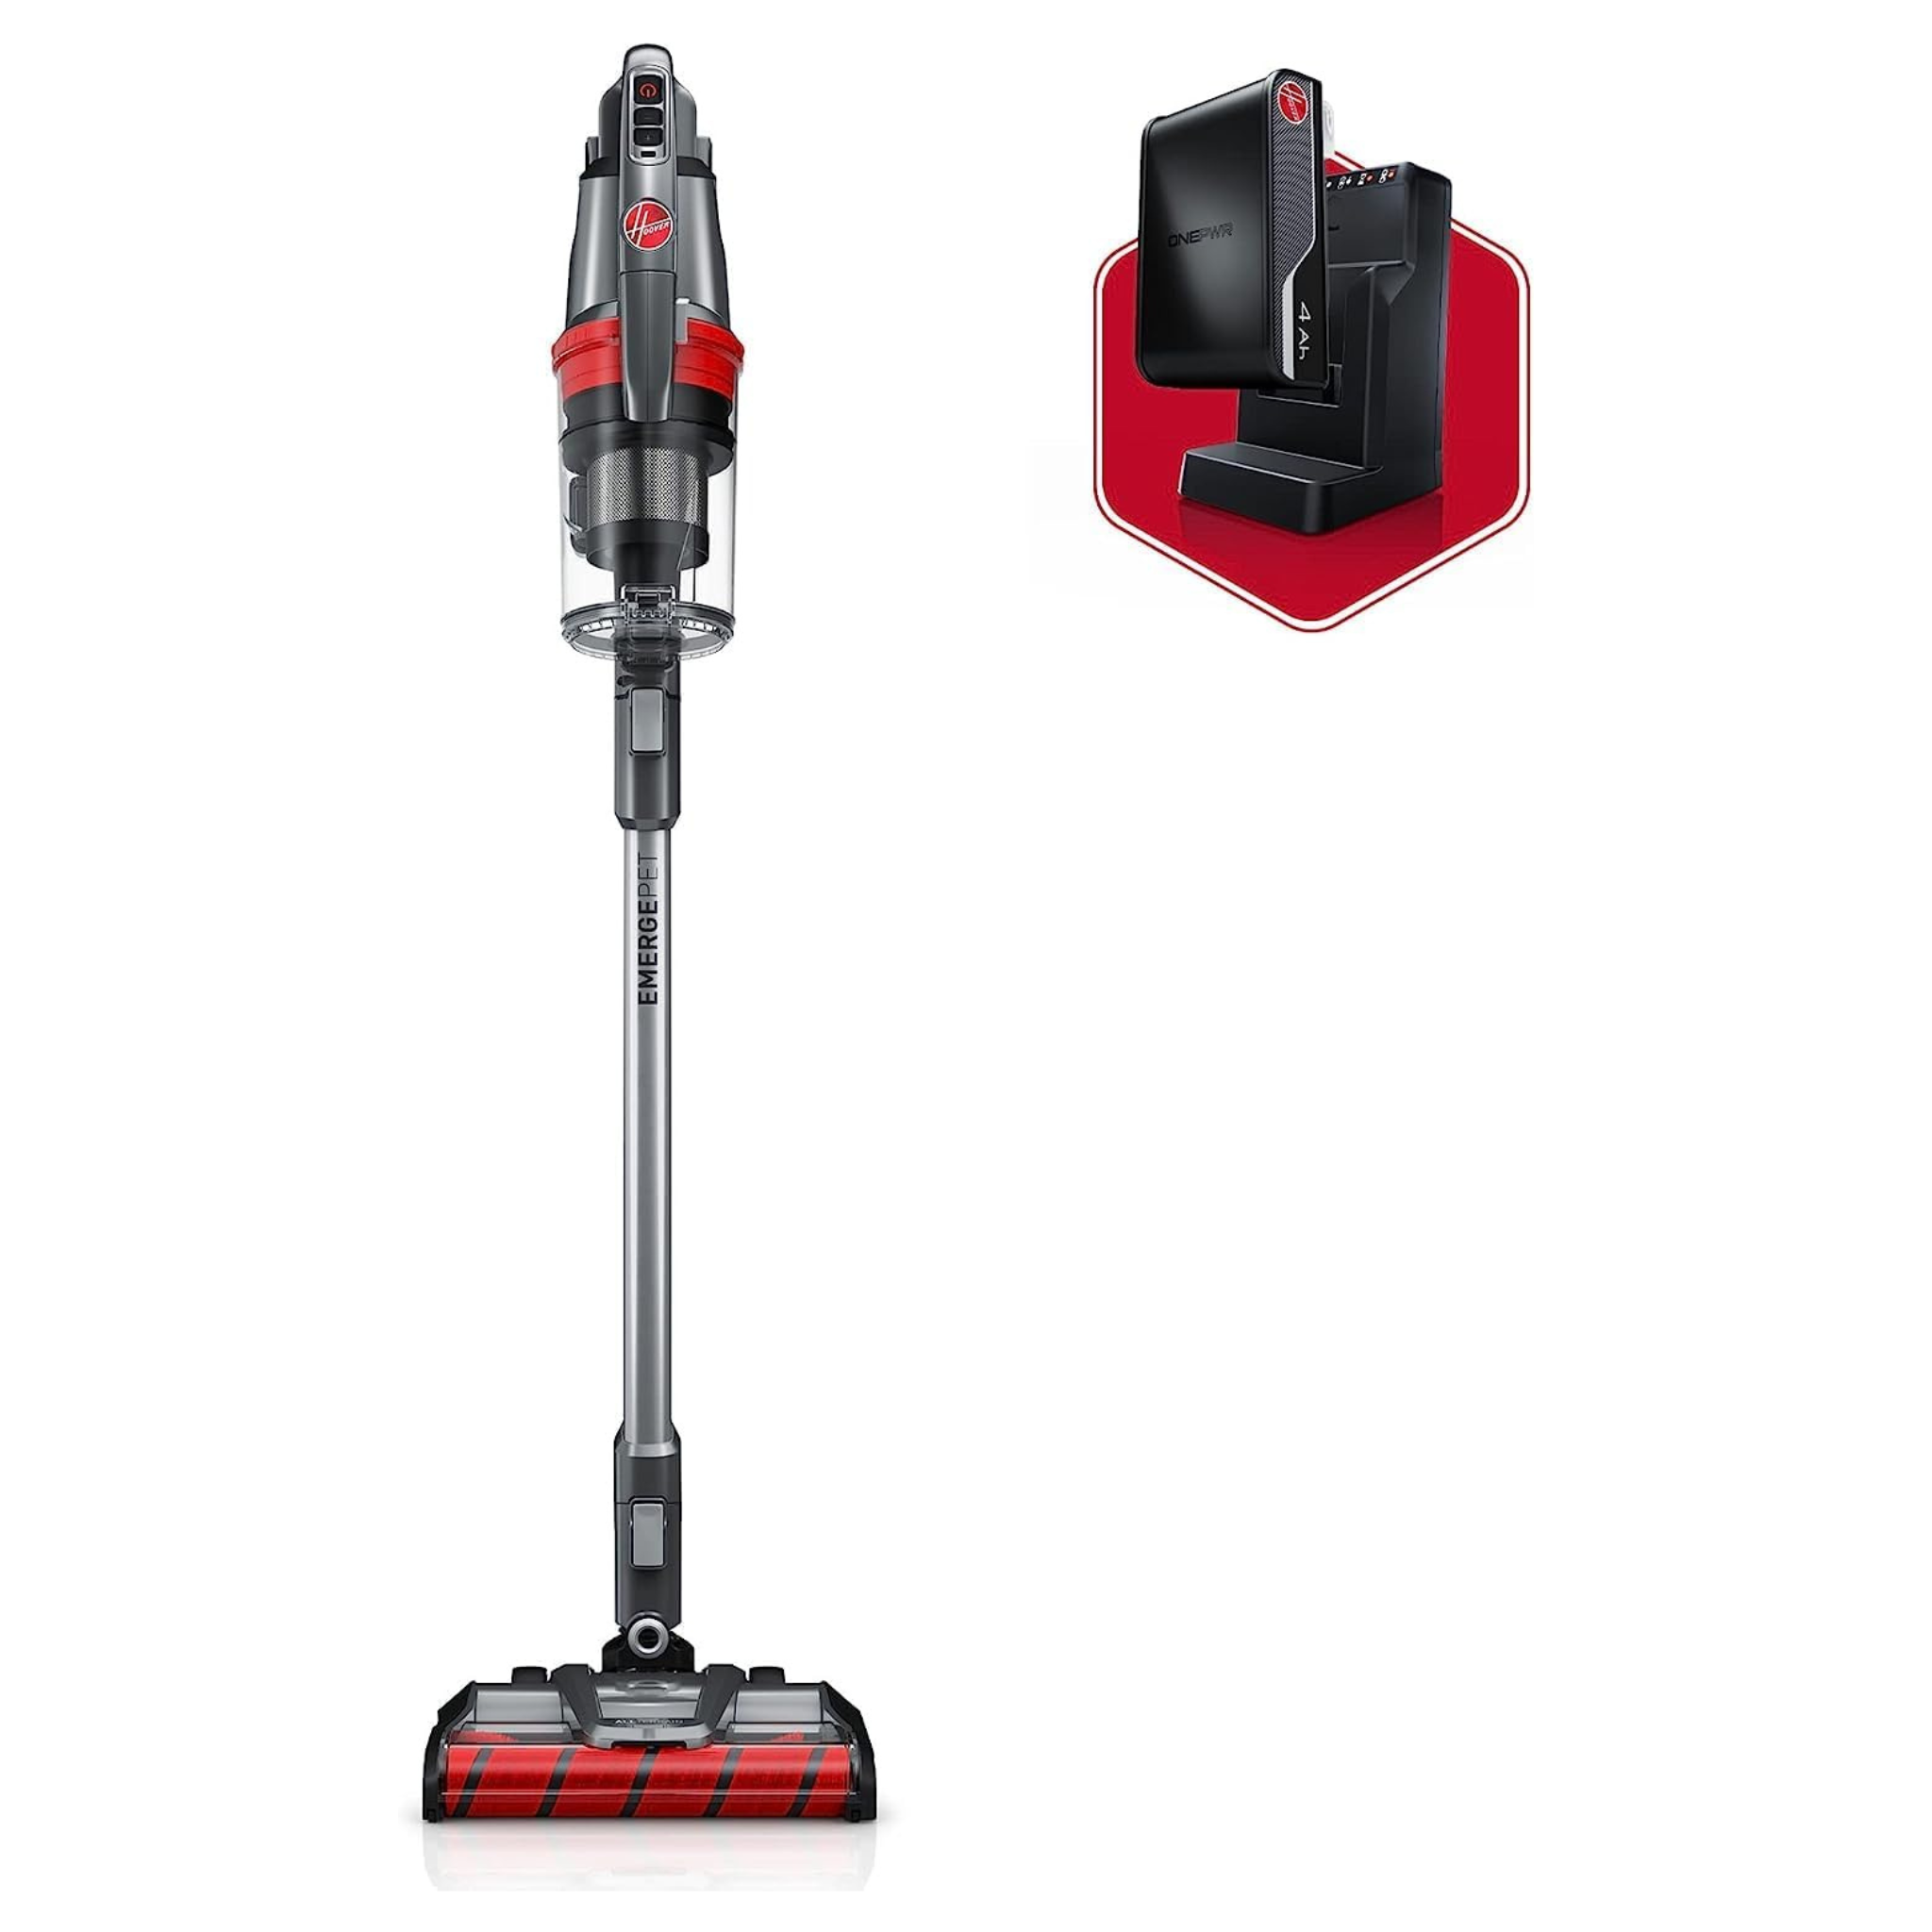 Hoover ONEPWR WindTunnel Emerge Pet Cordless Lightweight Stick Vacuum Cleaner